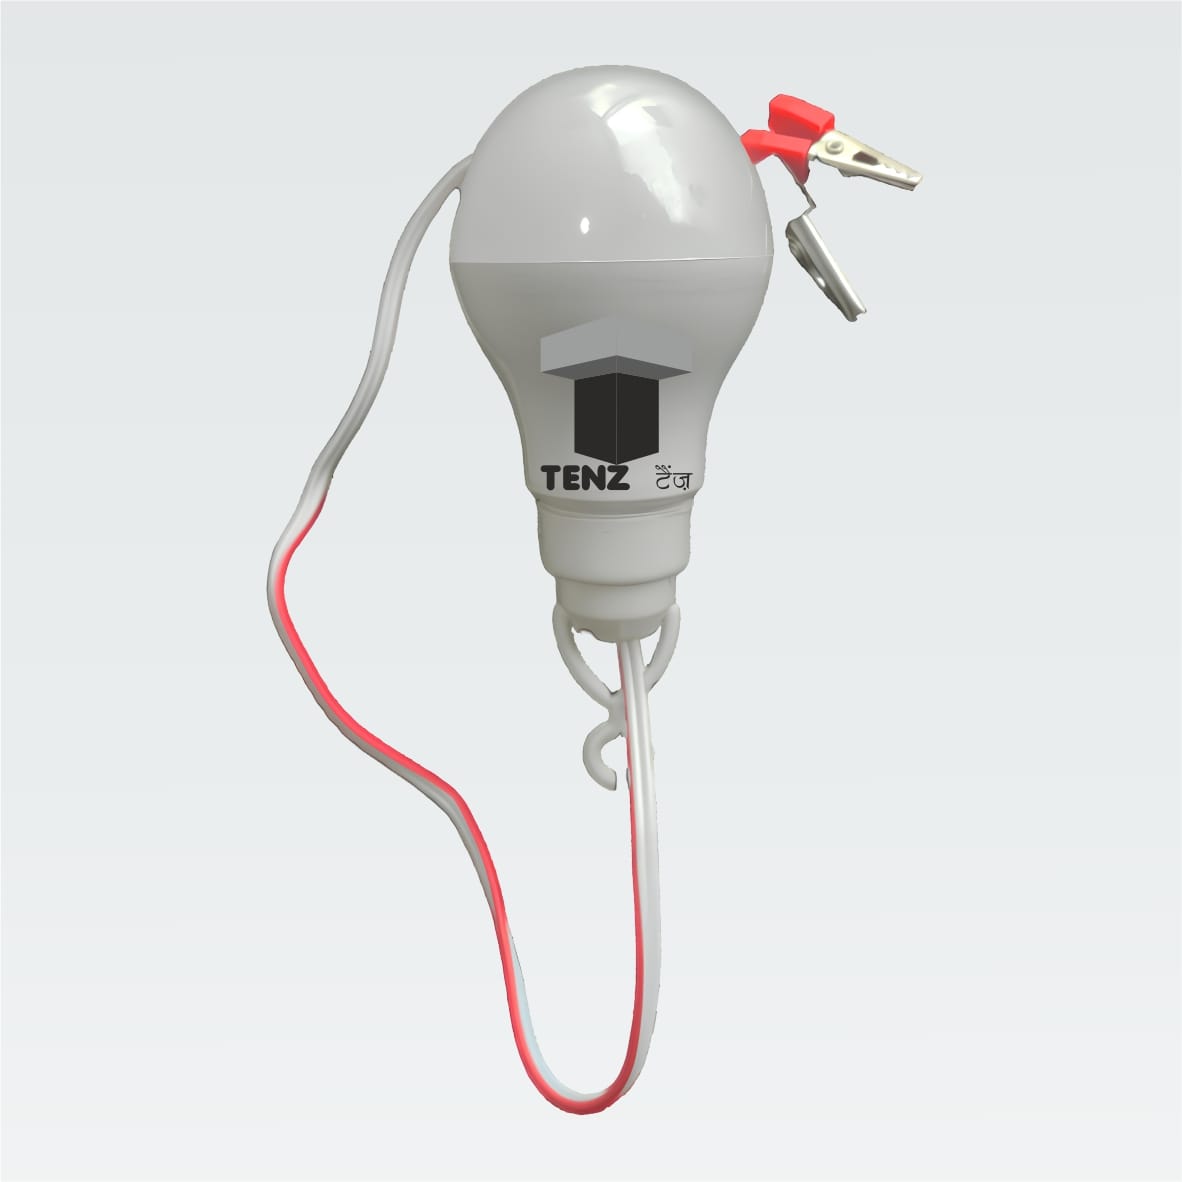 http://tenz.co.in/storage/photos/1/LED ACDC BULB.jpeg